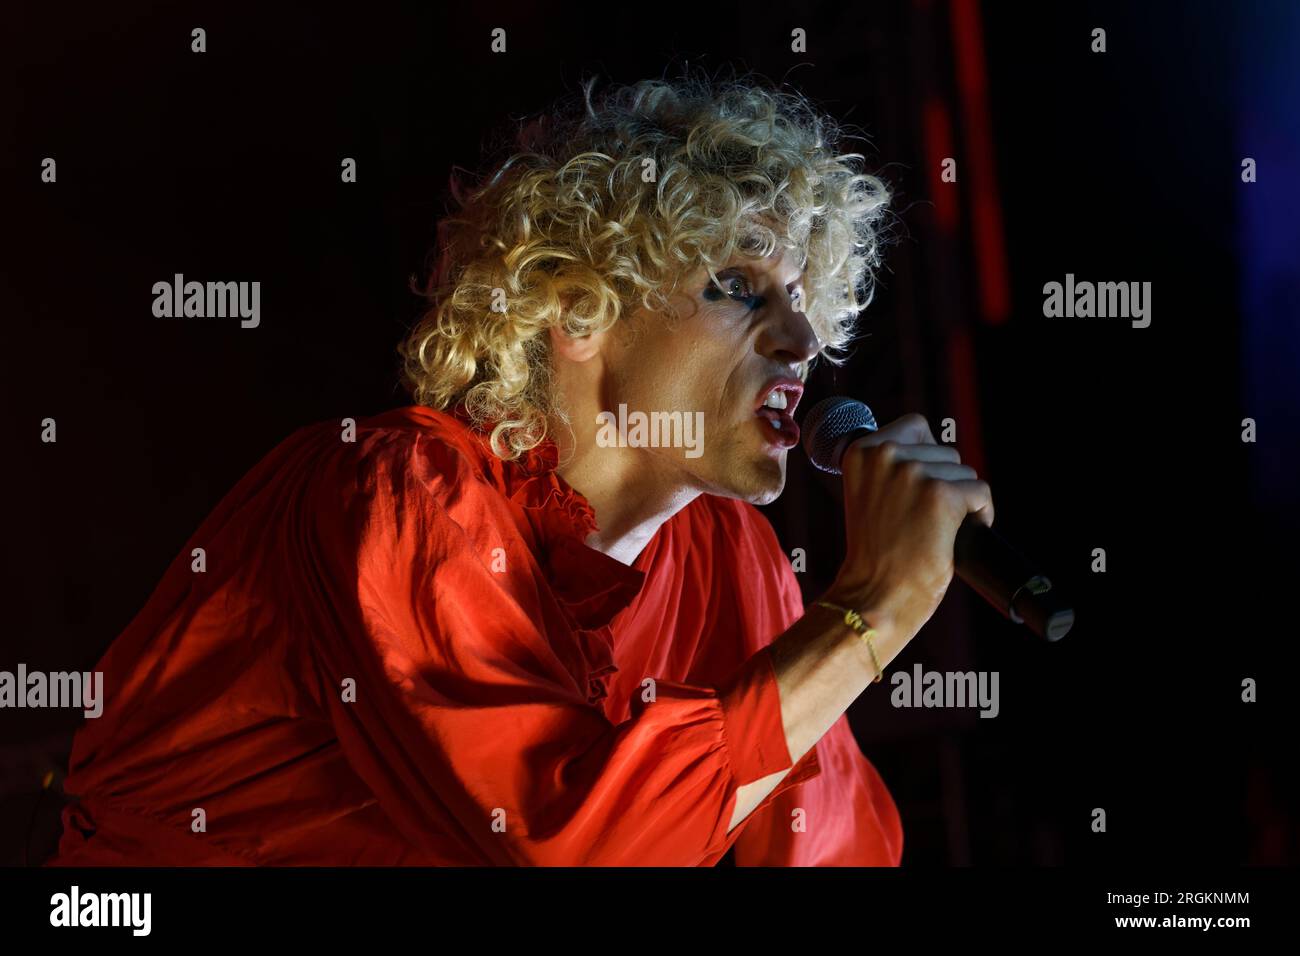 Quebec singer-songwriter Lumiere performs on stage in Montreal, Quebec, Canada Stock Photo